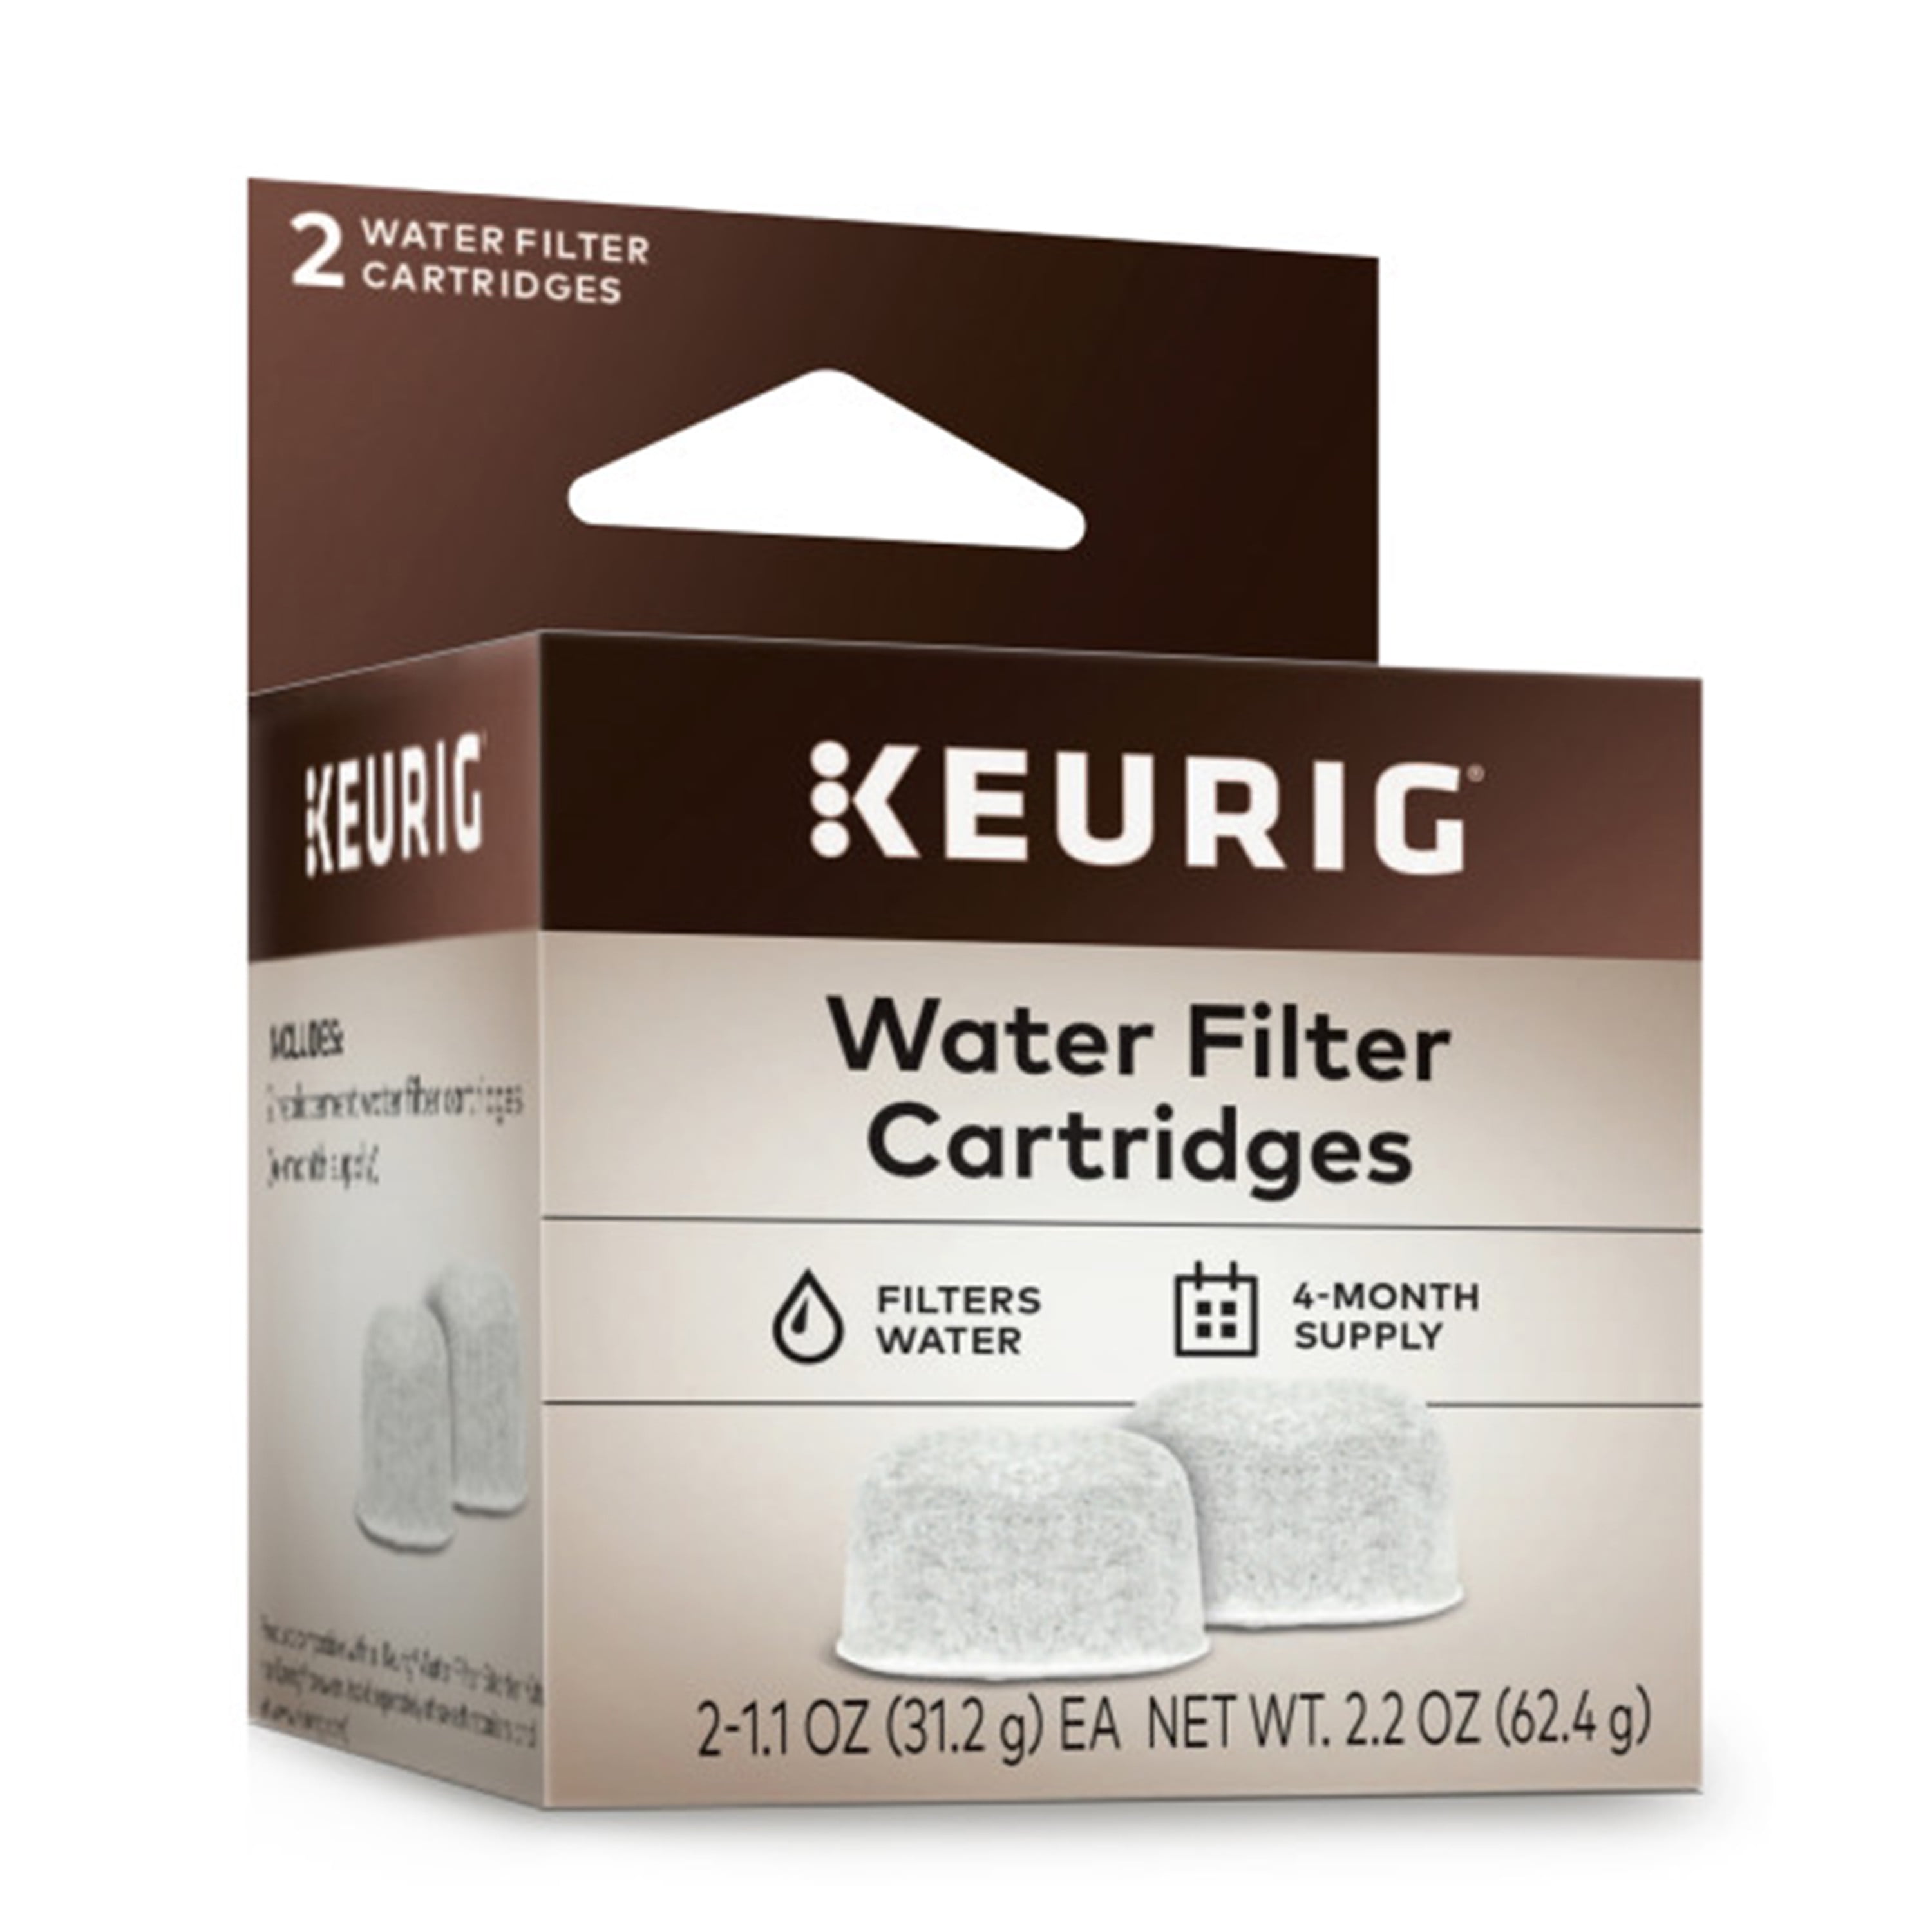 Keurig 2-Pack Water Filter Refill Cartridges, 2 Count, for Use with Keurig 2.0 and 1.0/Classic K-Cup Pod Coffee Makers - Walmart.com